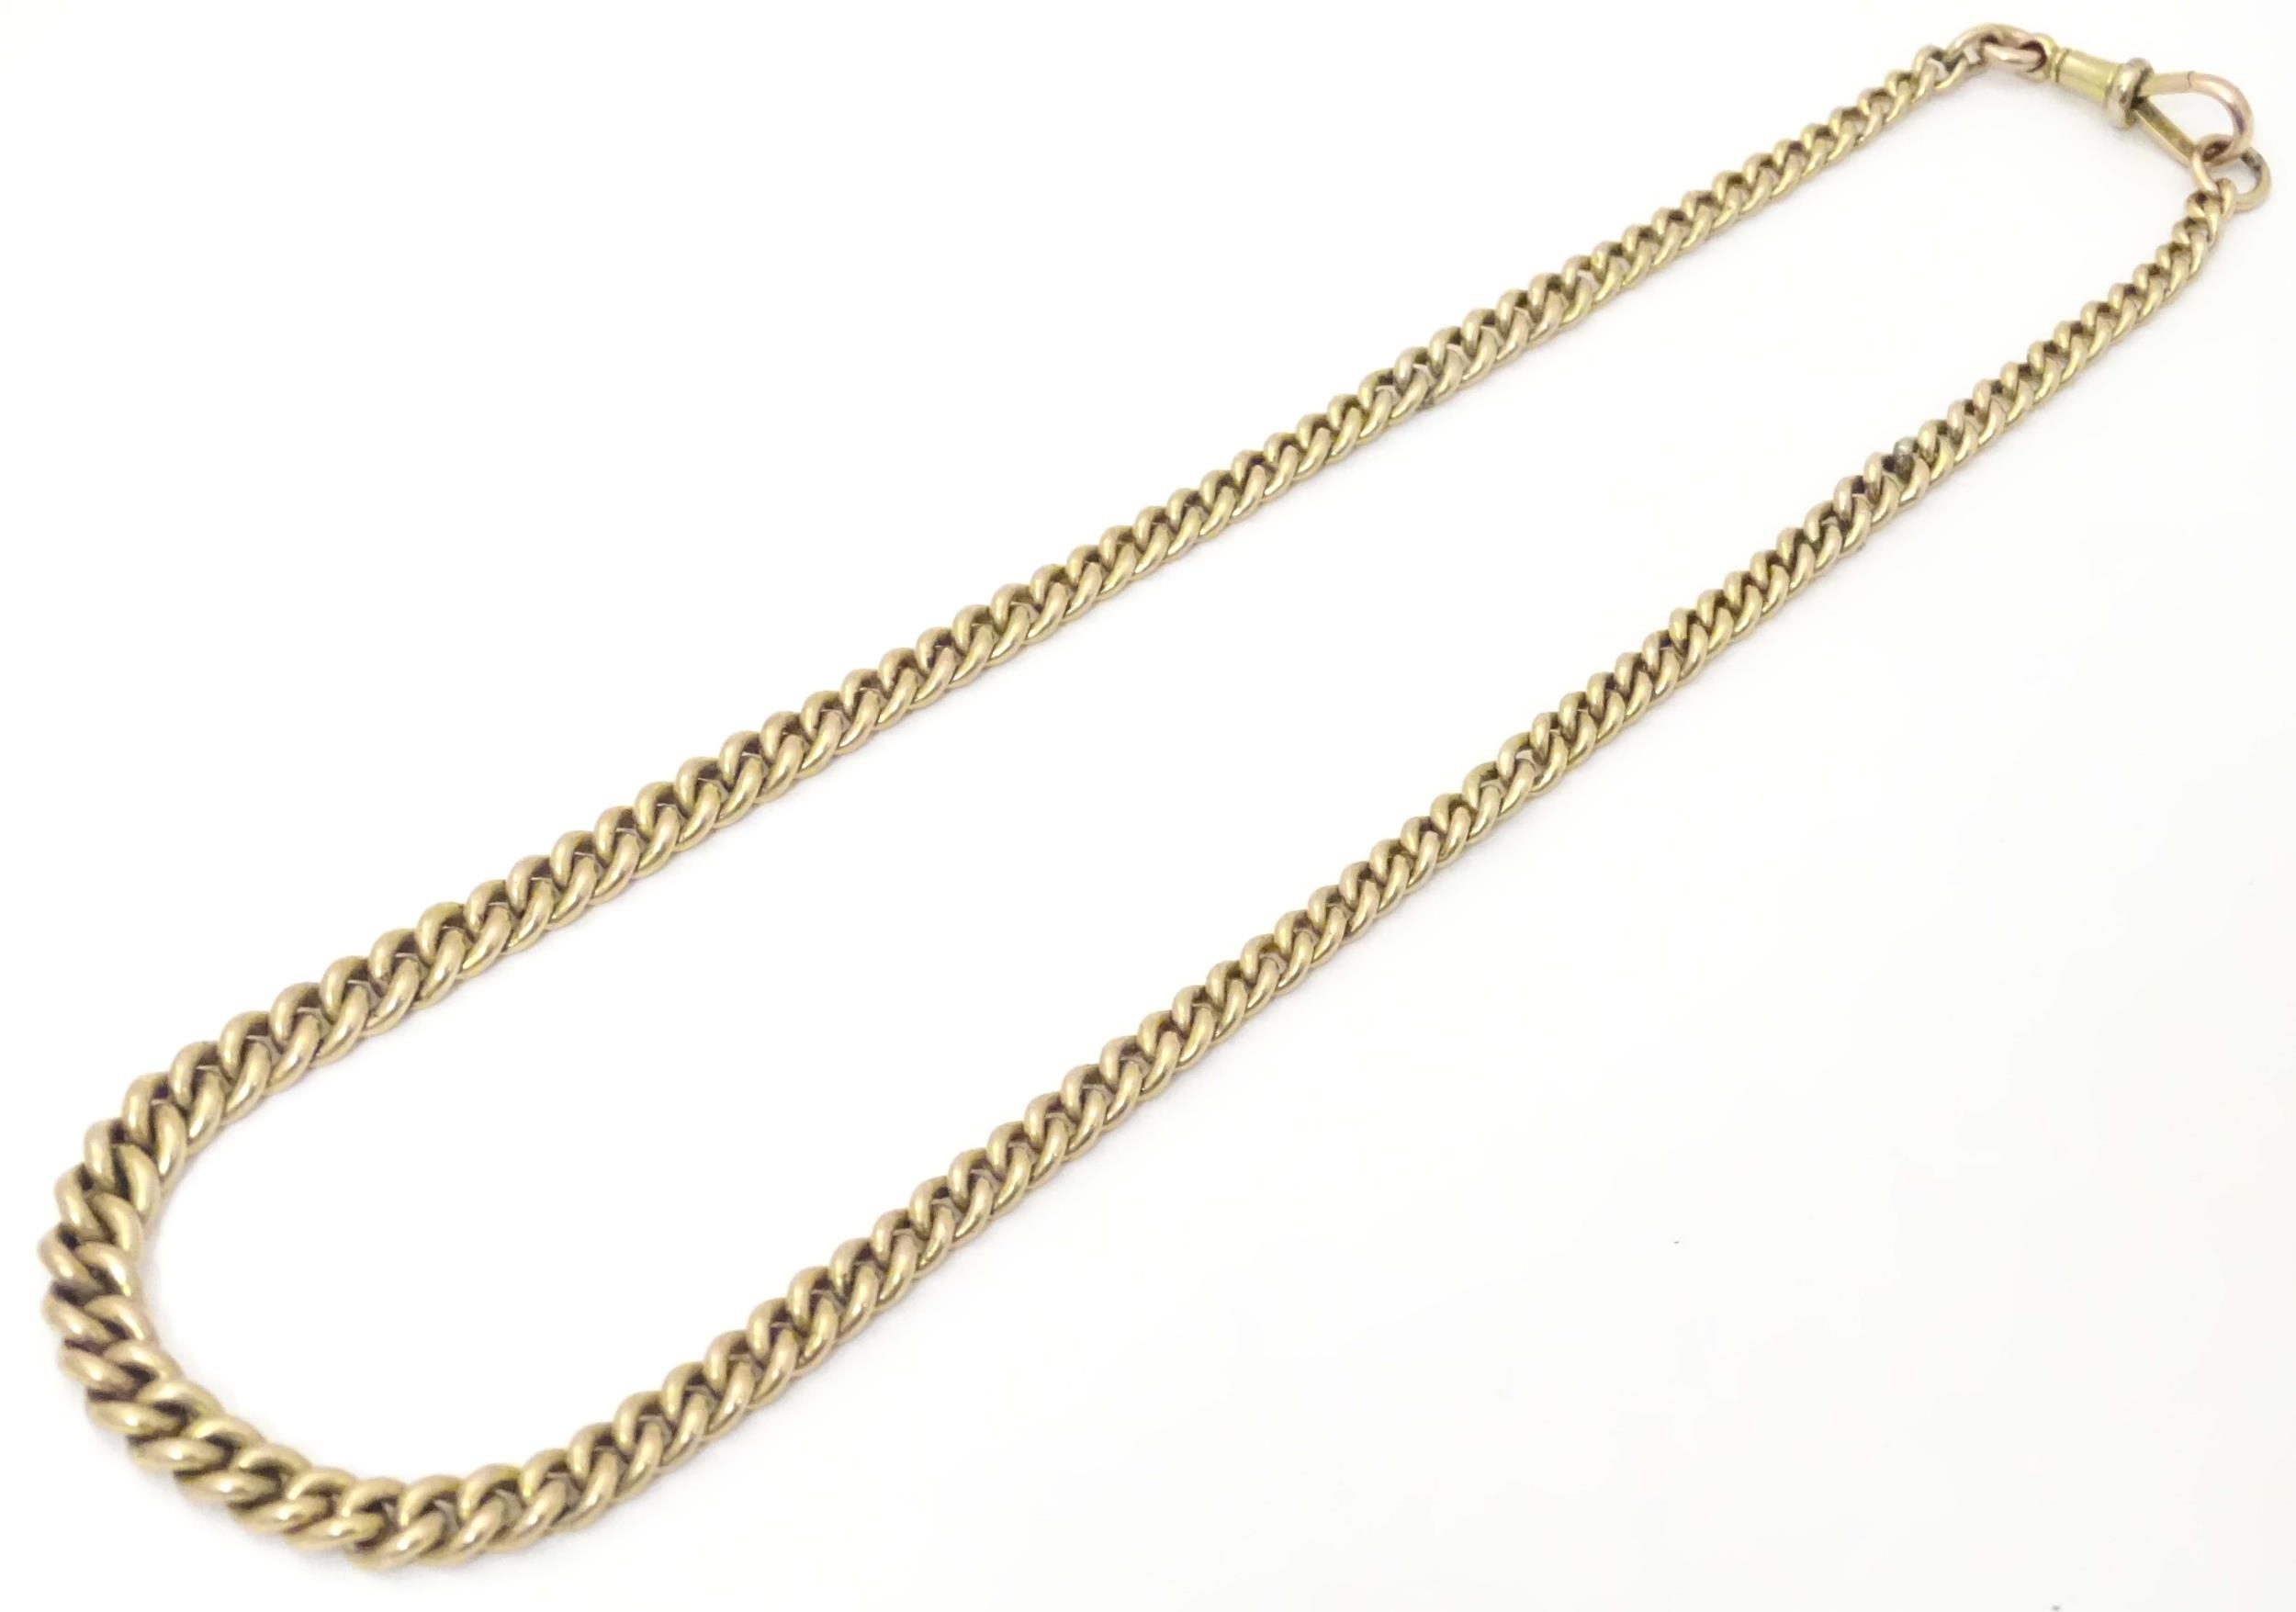 A 9ct gold graduated curblink watch chain. Approx 16" long Please Note - we do not make reference to